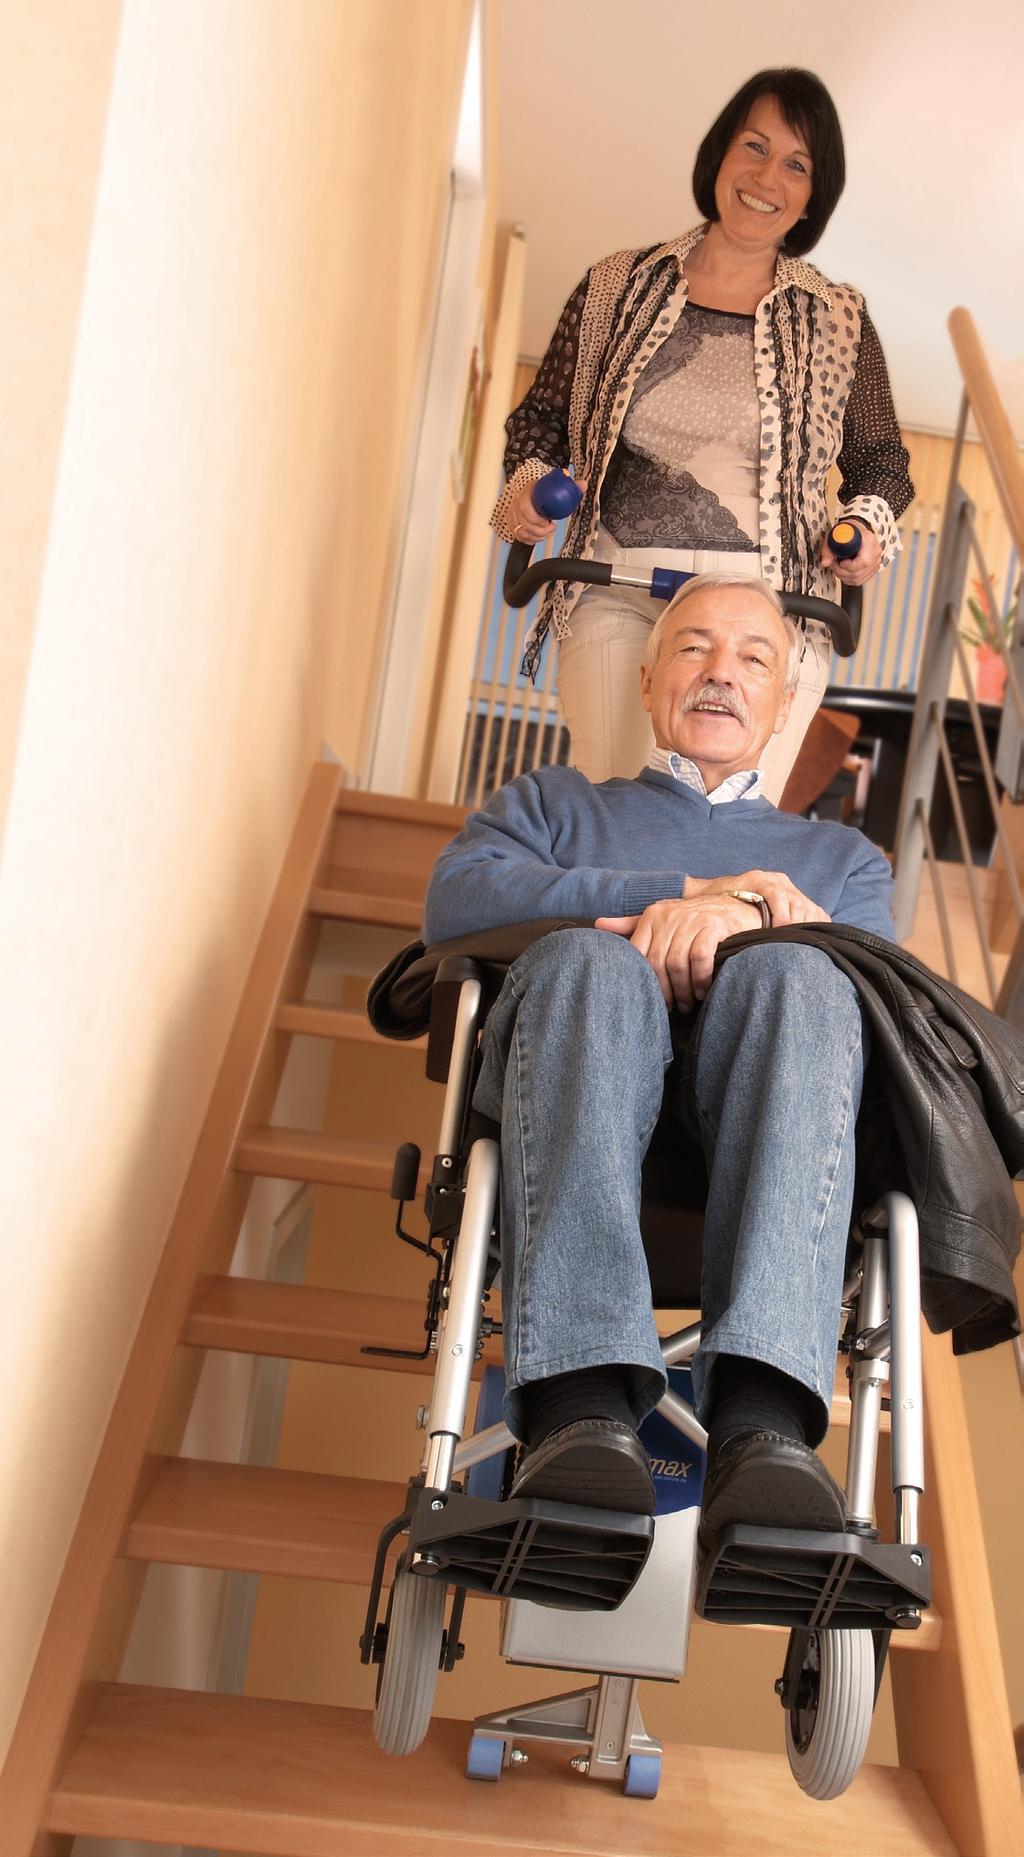 Conquer stairs inside and outside safely and comfortably in your own wheelchair.